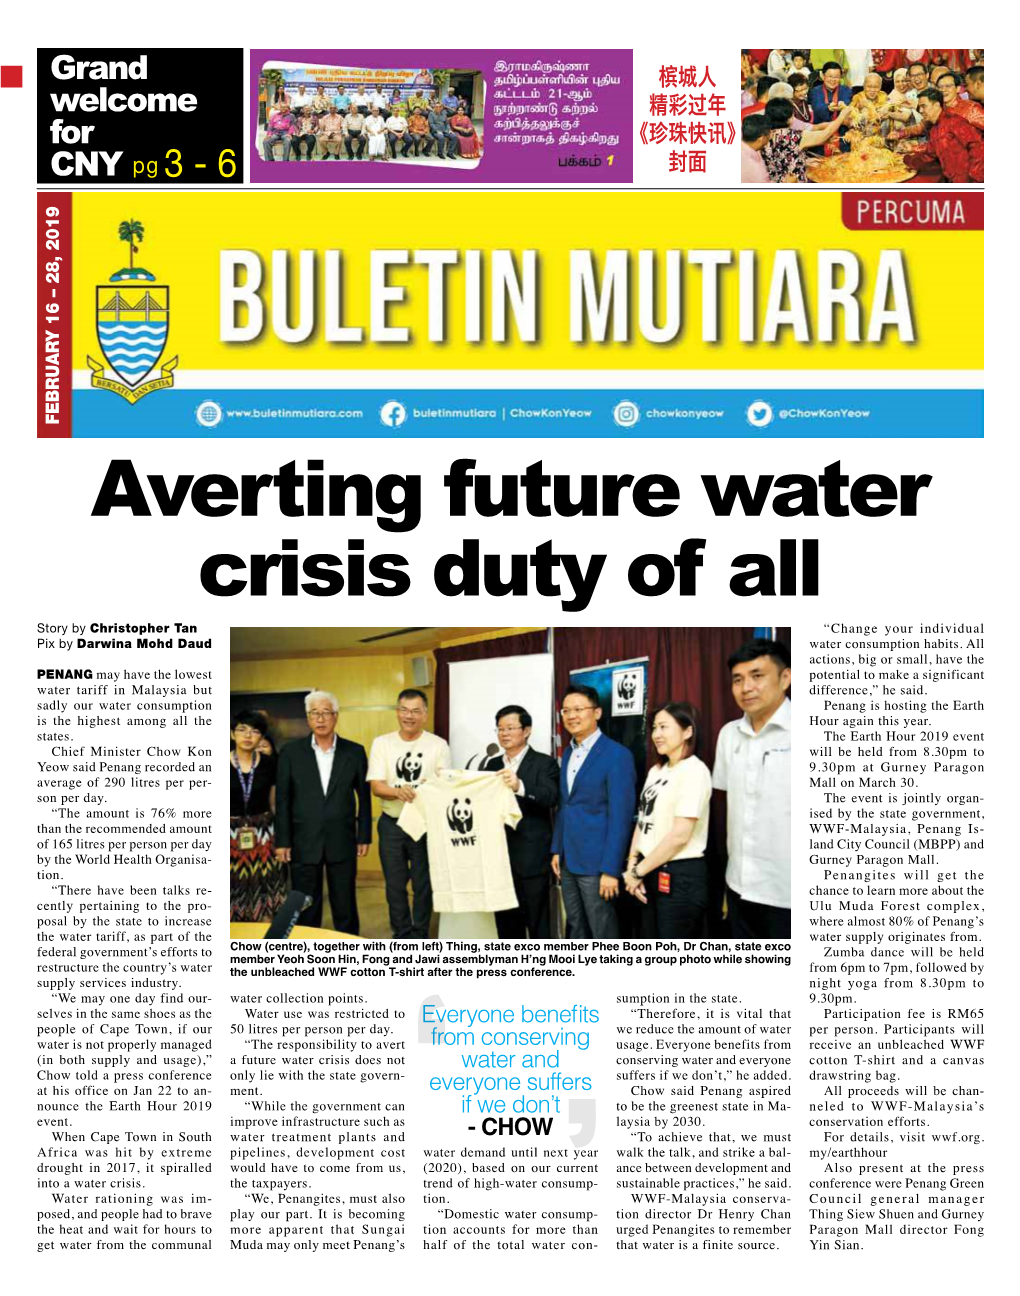 Averting Future Water Crisis Duty of All Story by Christopher Tan “Change Your Individual Pix by Darwina Mohd Daud Water Consumption Habits